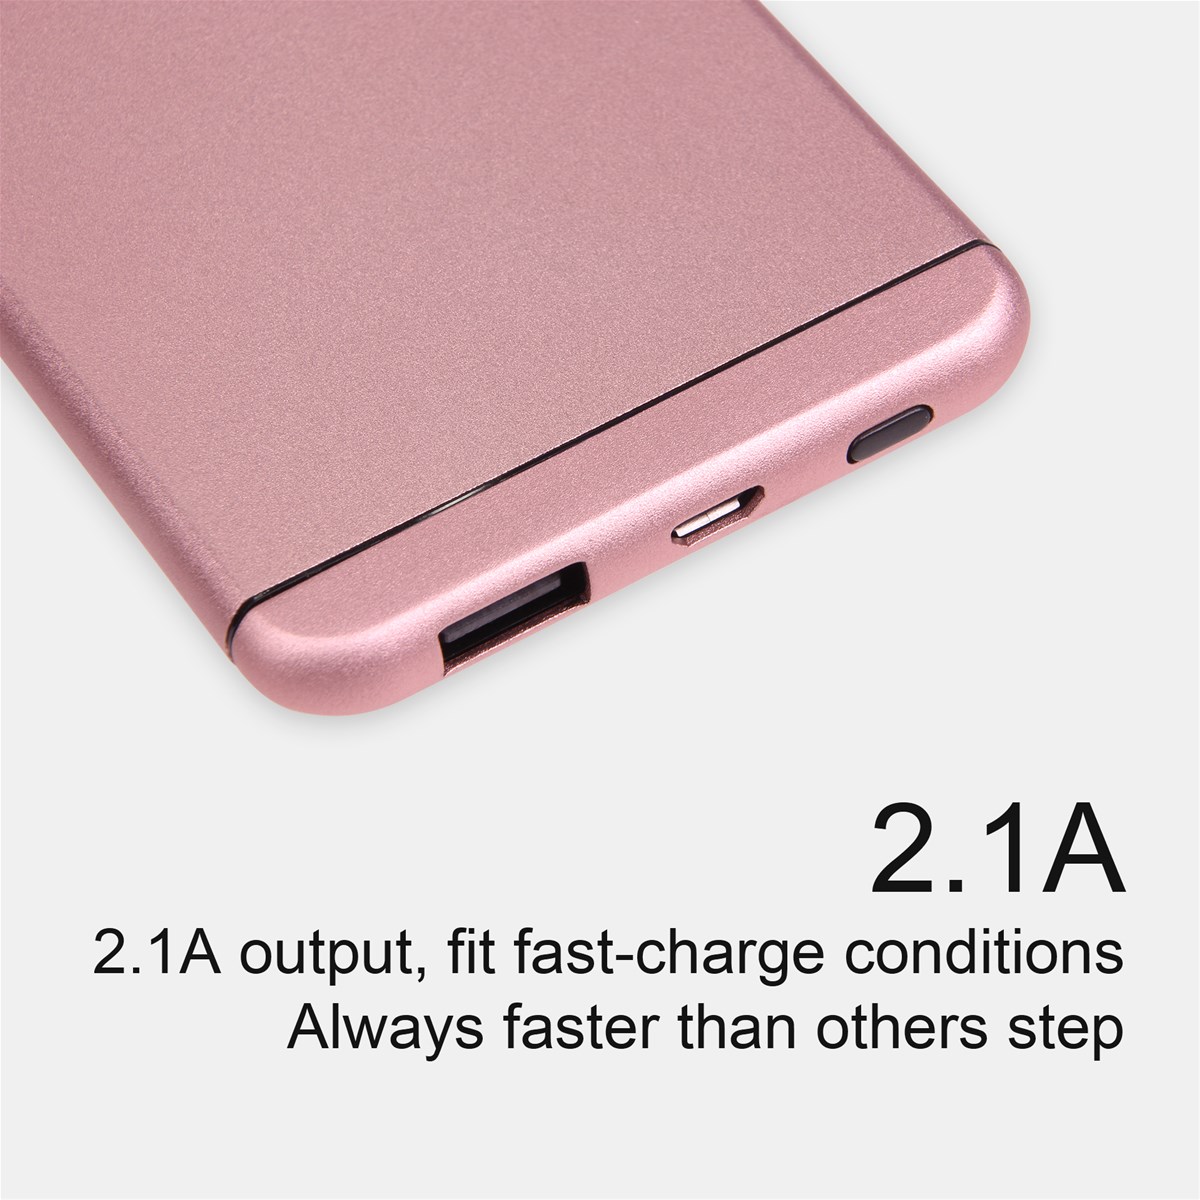 Lithium polymer battery Slim and light best mobile power bank 5000mah outdoor portable usb charger